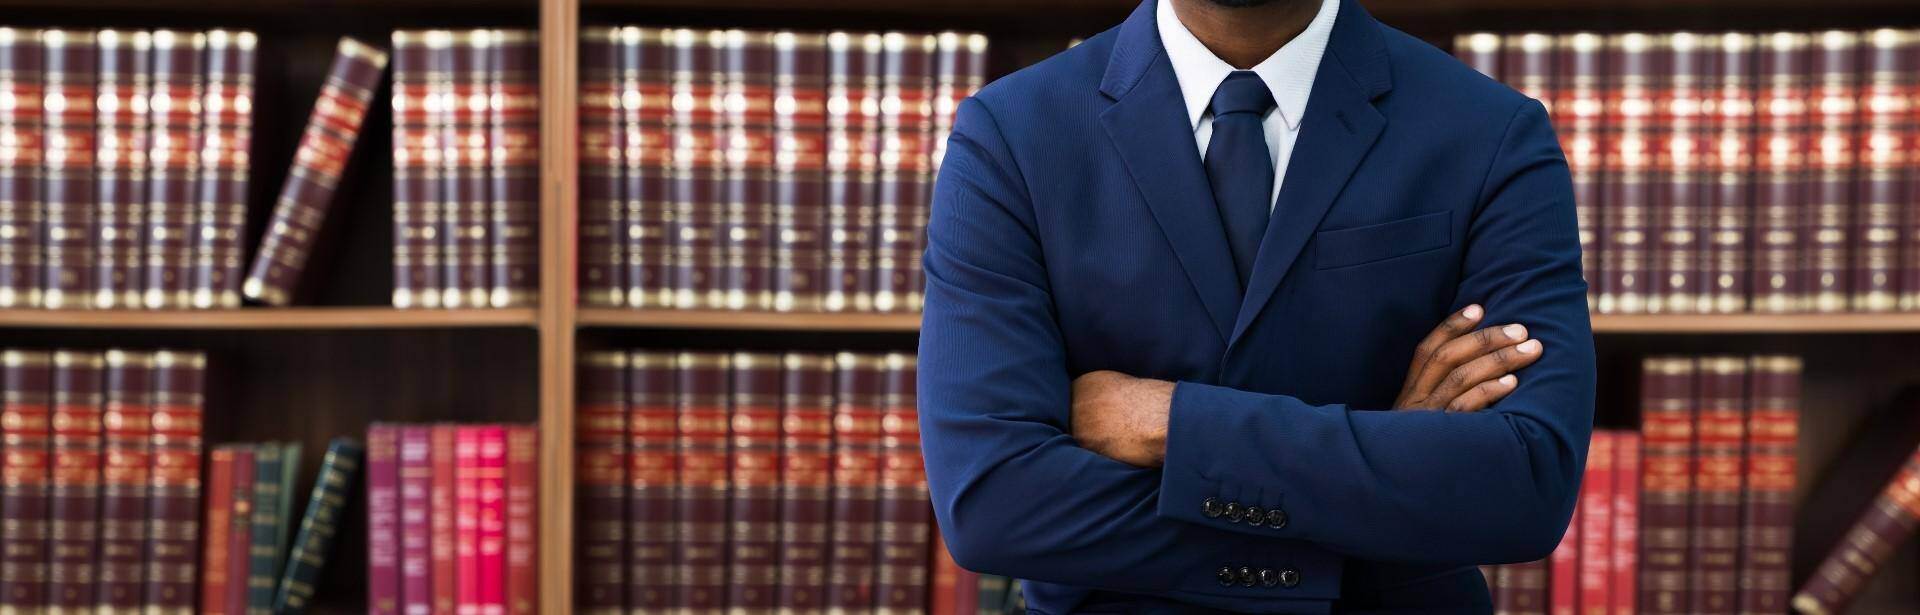 A black lawyer standing in front of a bookshelf of law book in Macon, Georgia